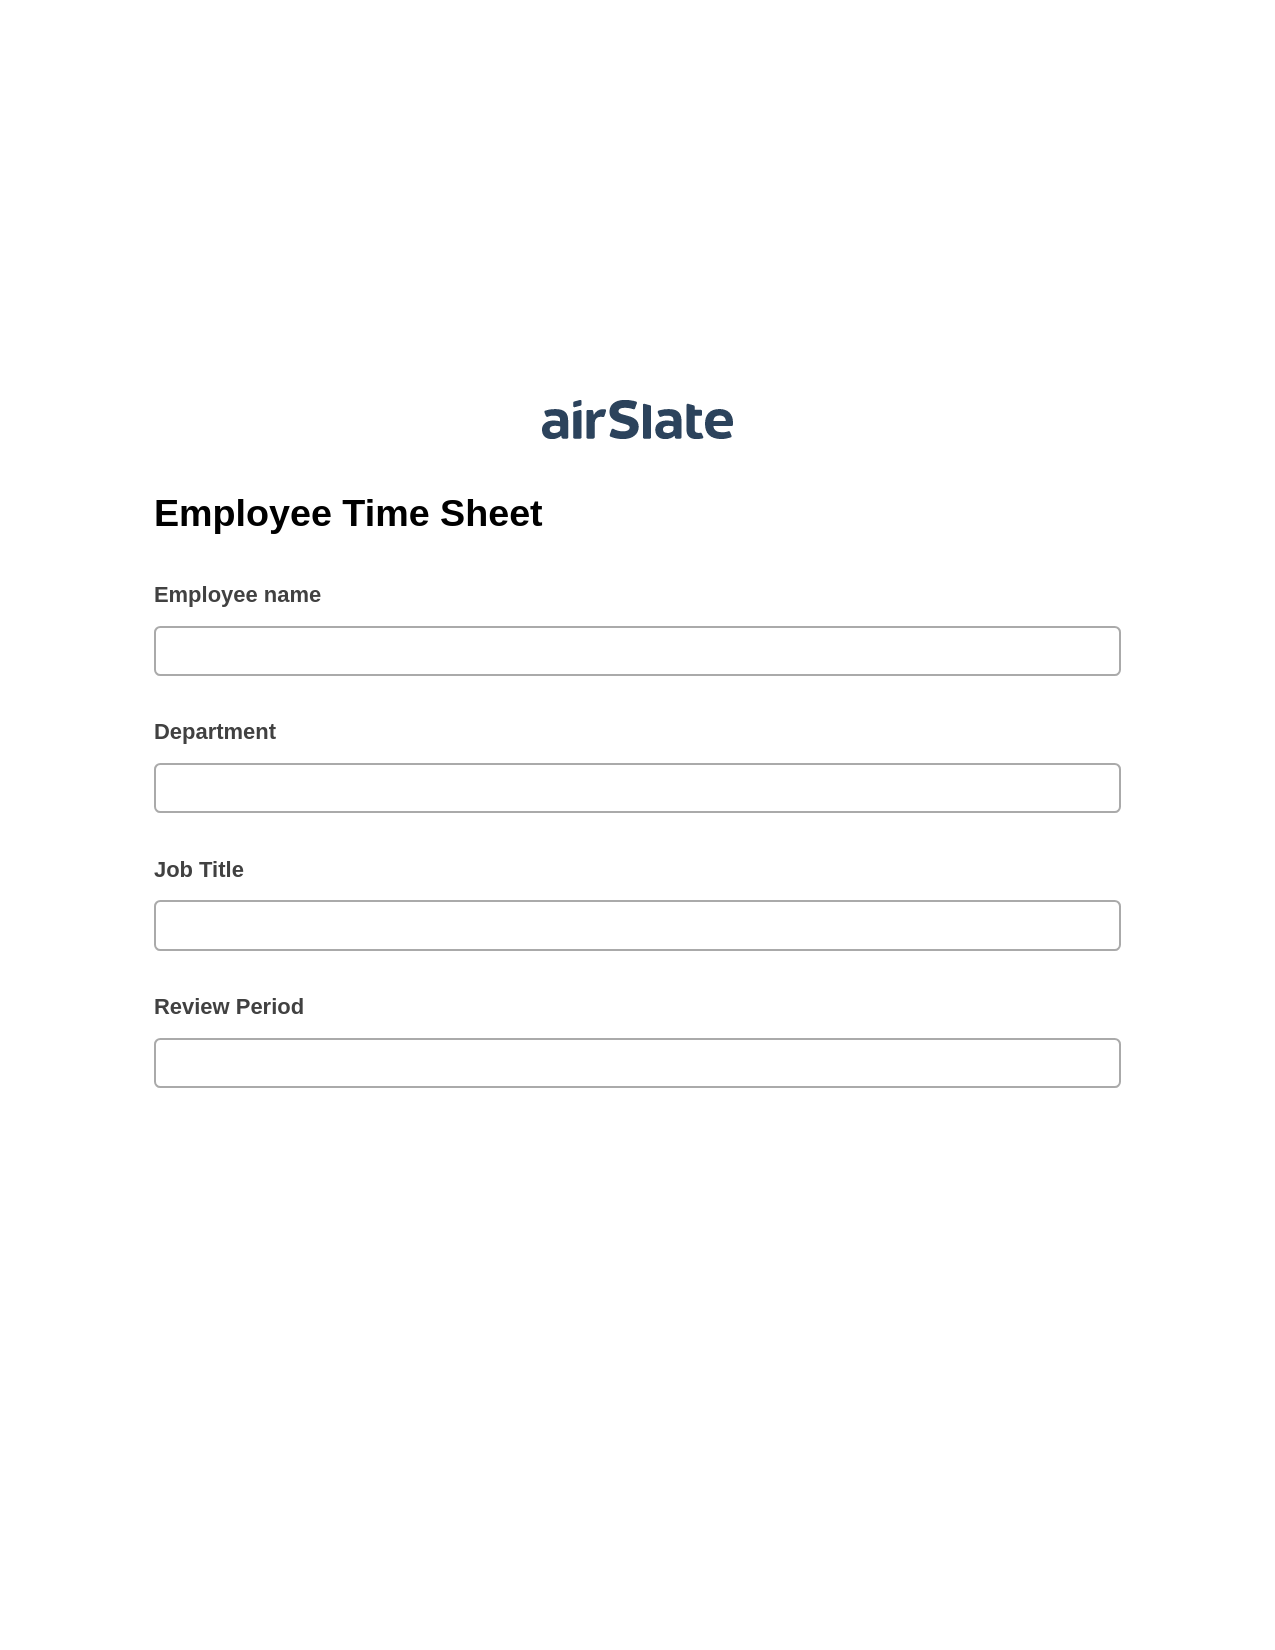 Employee Time Sheet Pre-fill from CSV File Bot, Unassign Role Bot, Slack Two-Way Binding Bot